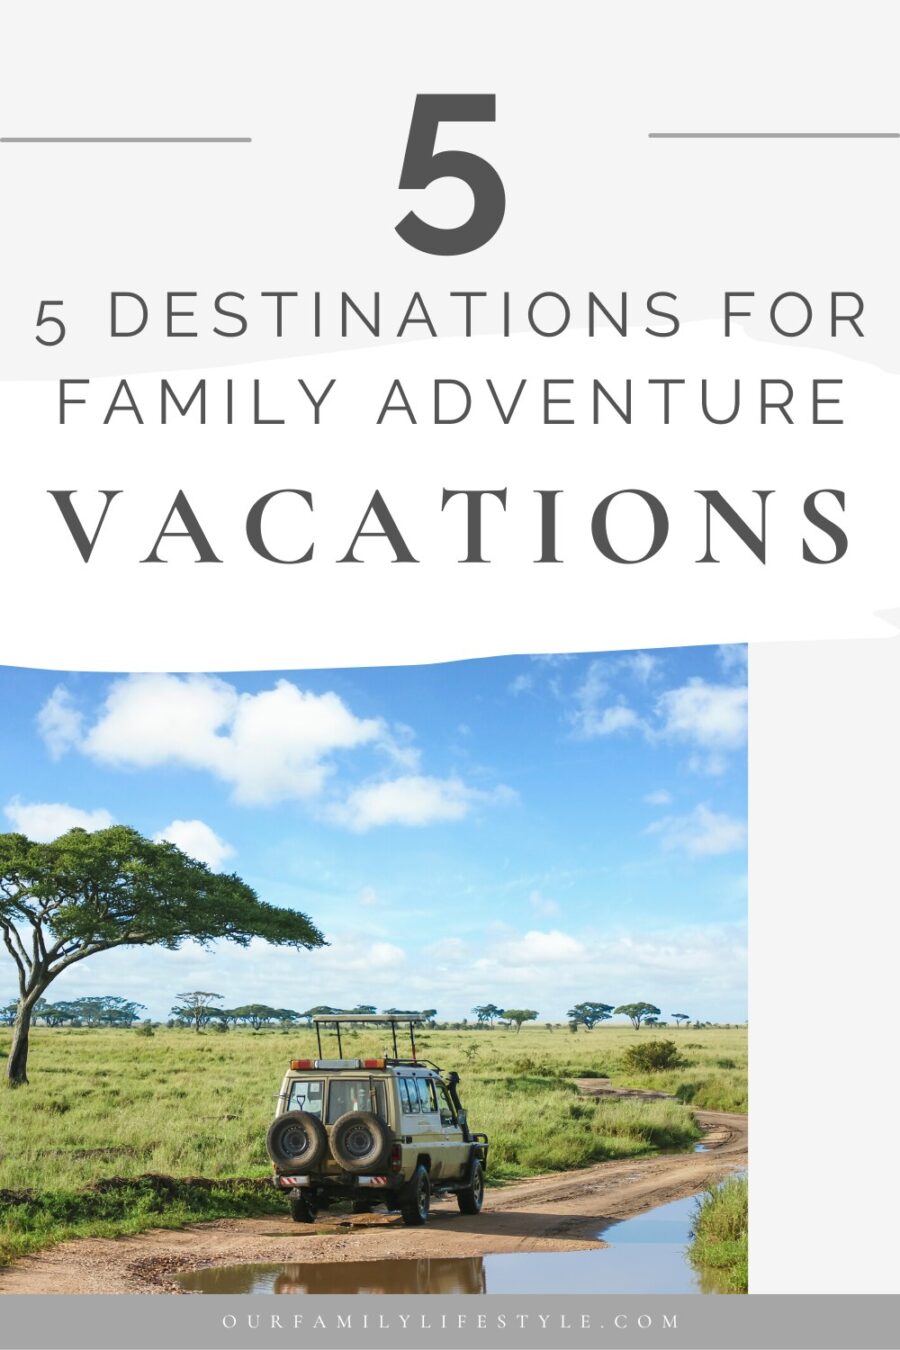 5 Incredible Destinations for Family Adventure Vacations